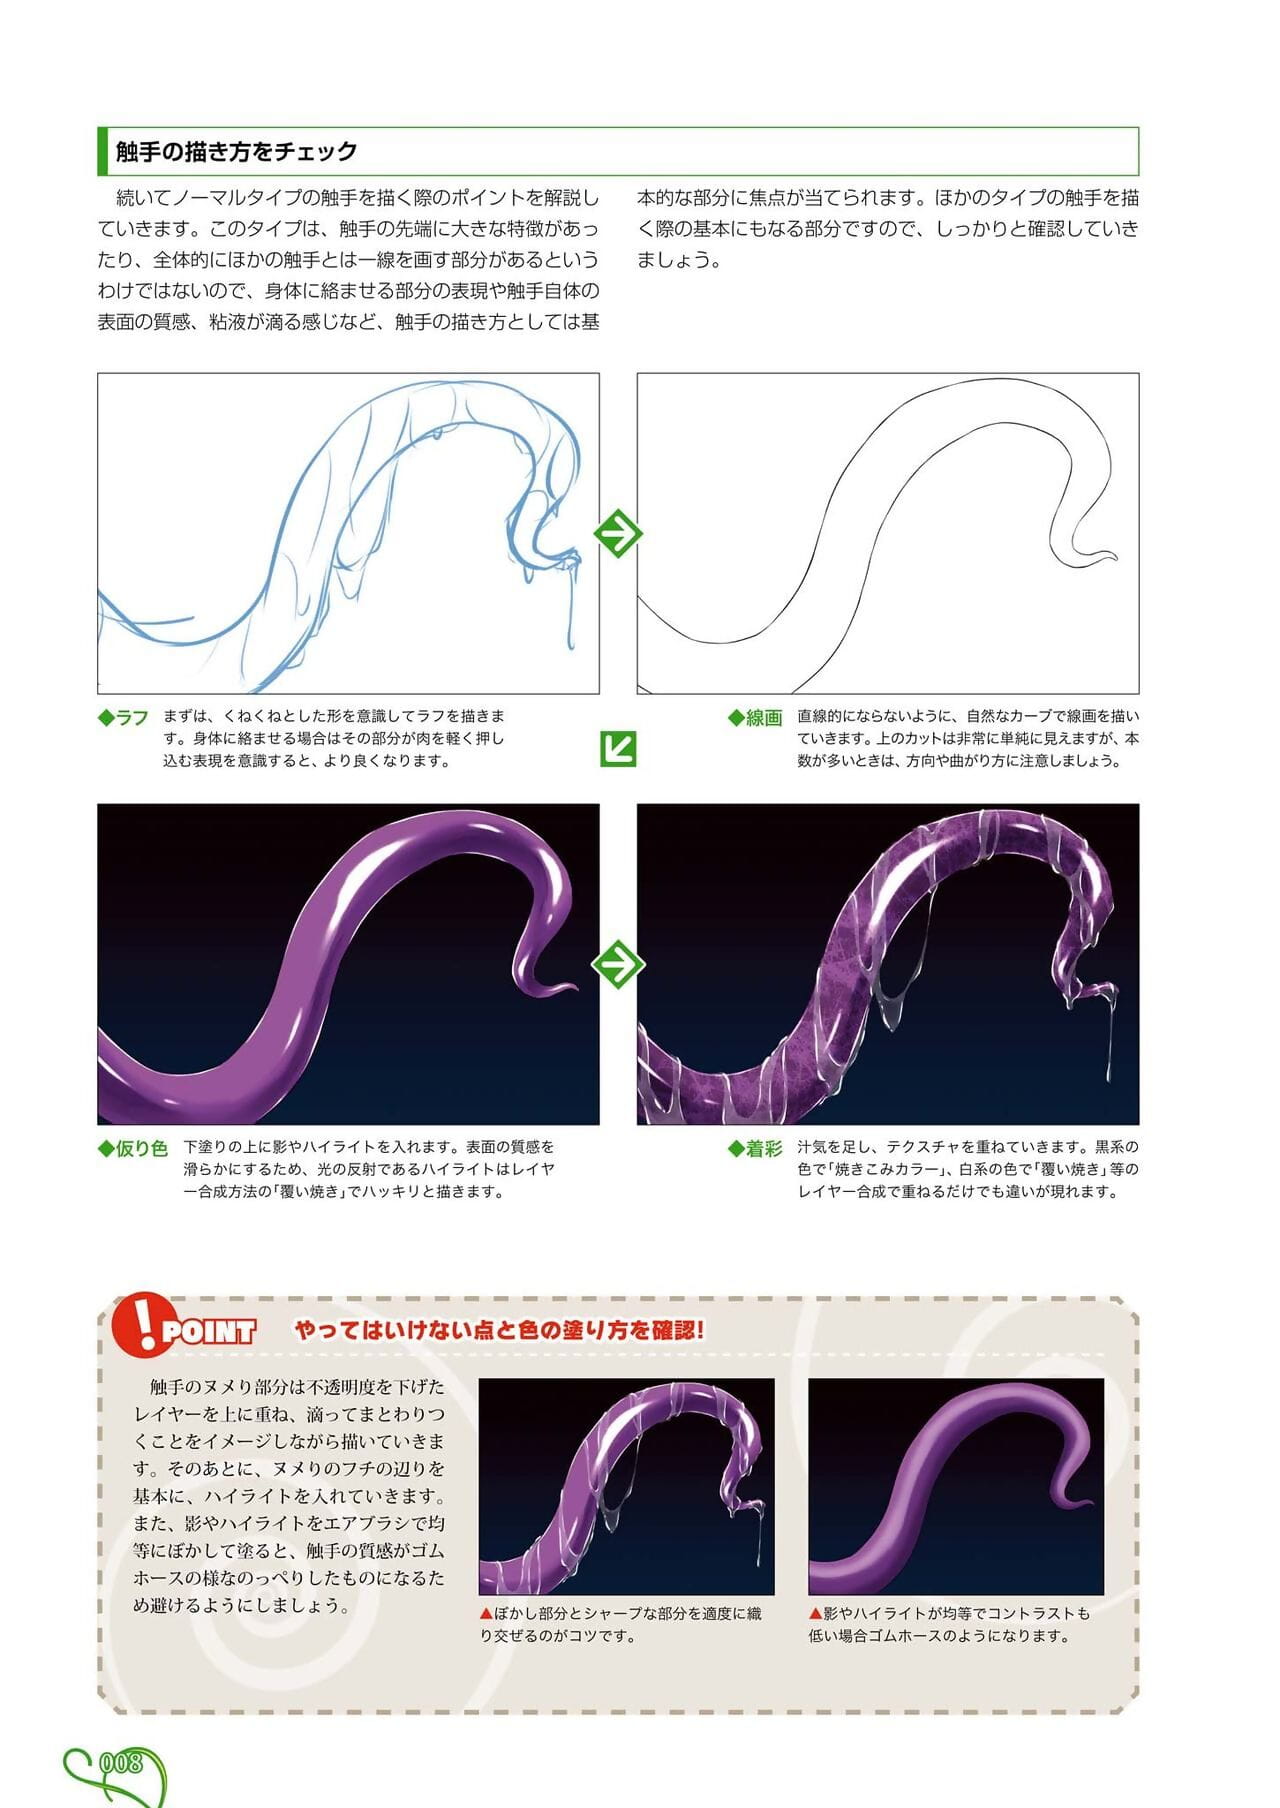 How to draw tentacles page 1